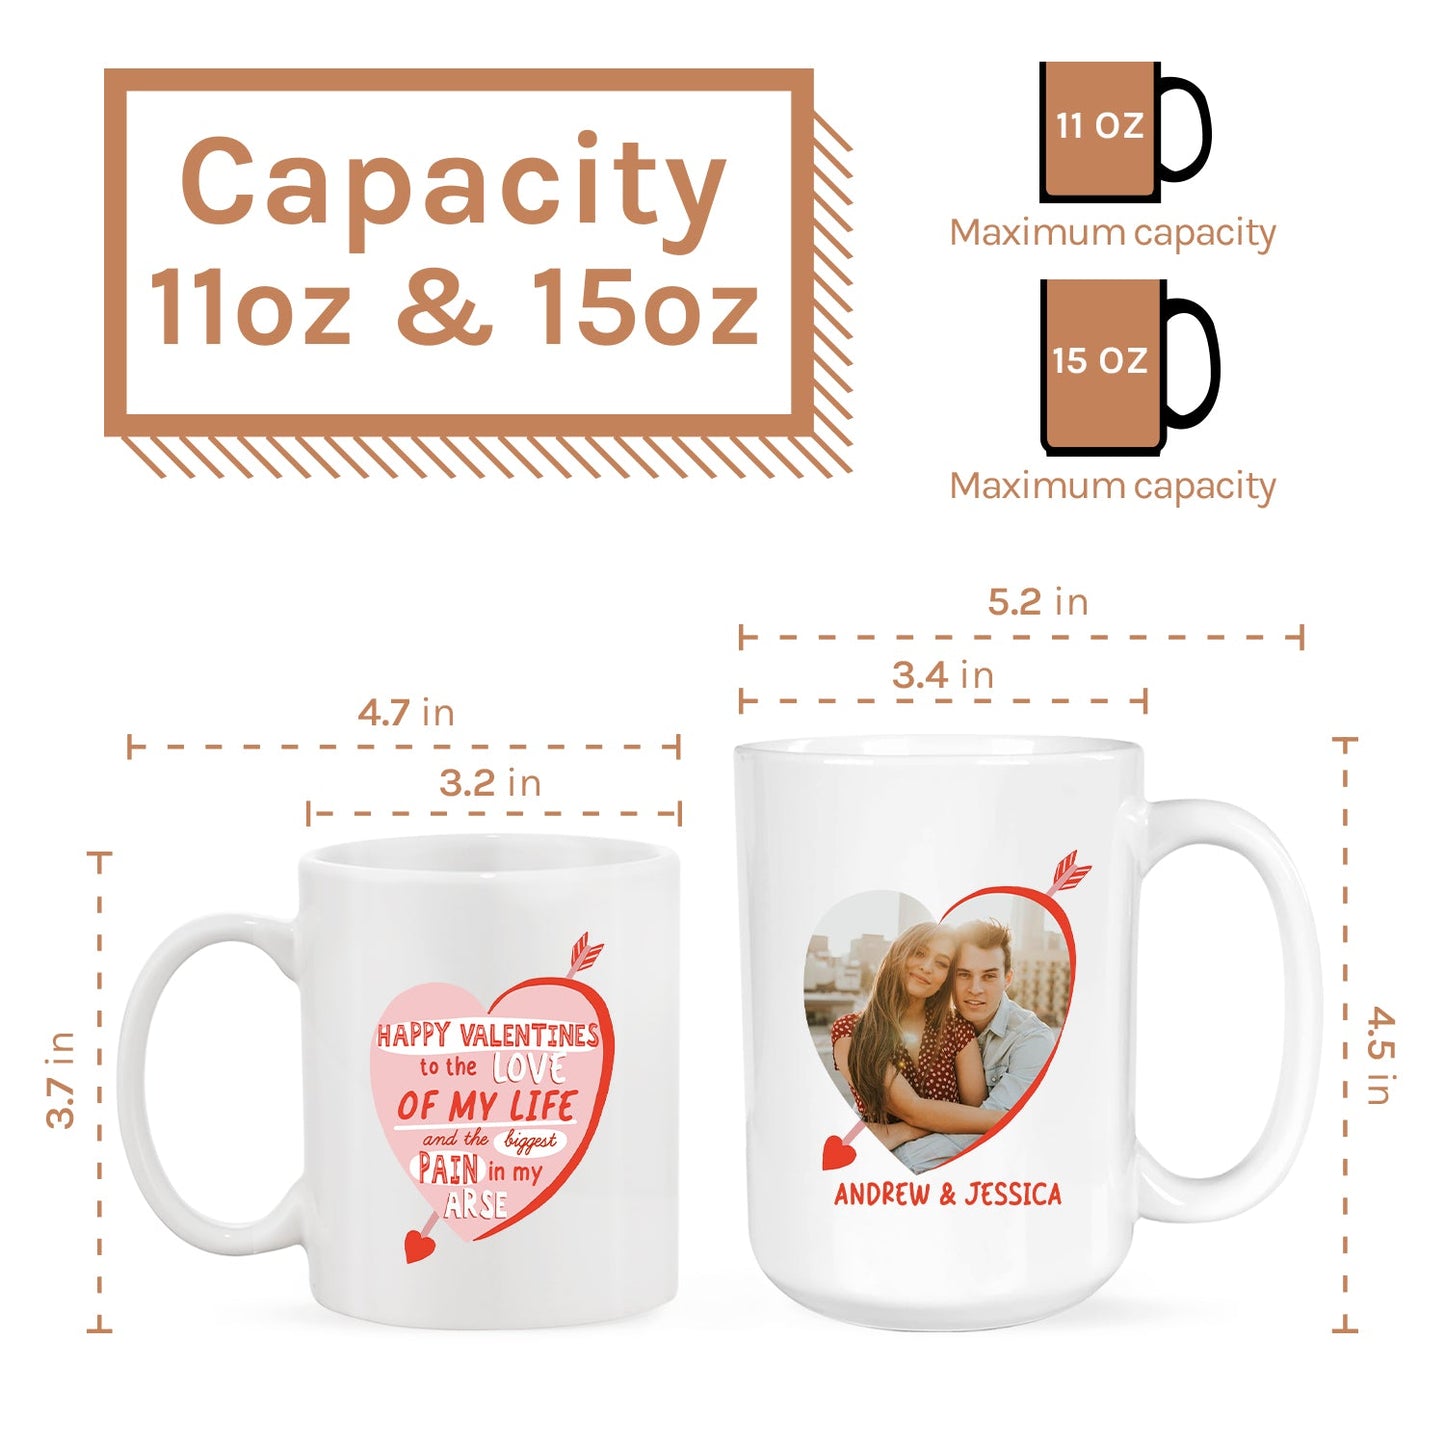 The Love Of My Life And The Pain In My Arse - Personalized Valentine's Day gift For Boyfriend or Girlfriend - Custom Mug - MyMindfulGifts